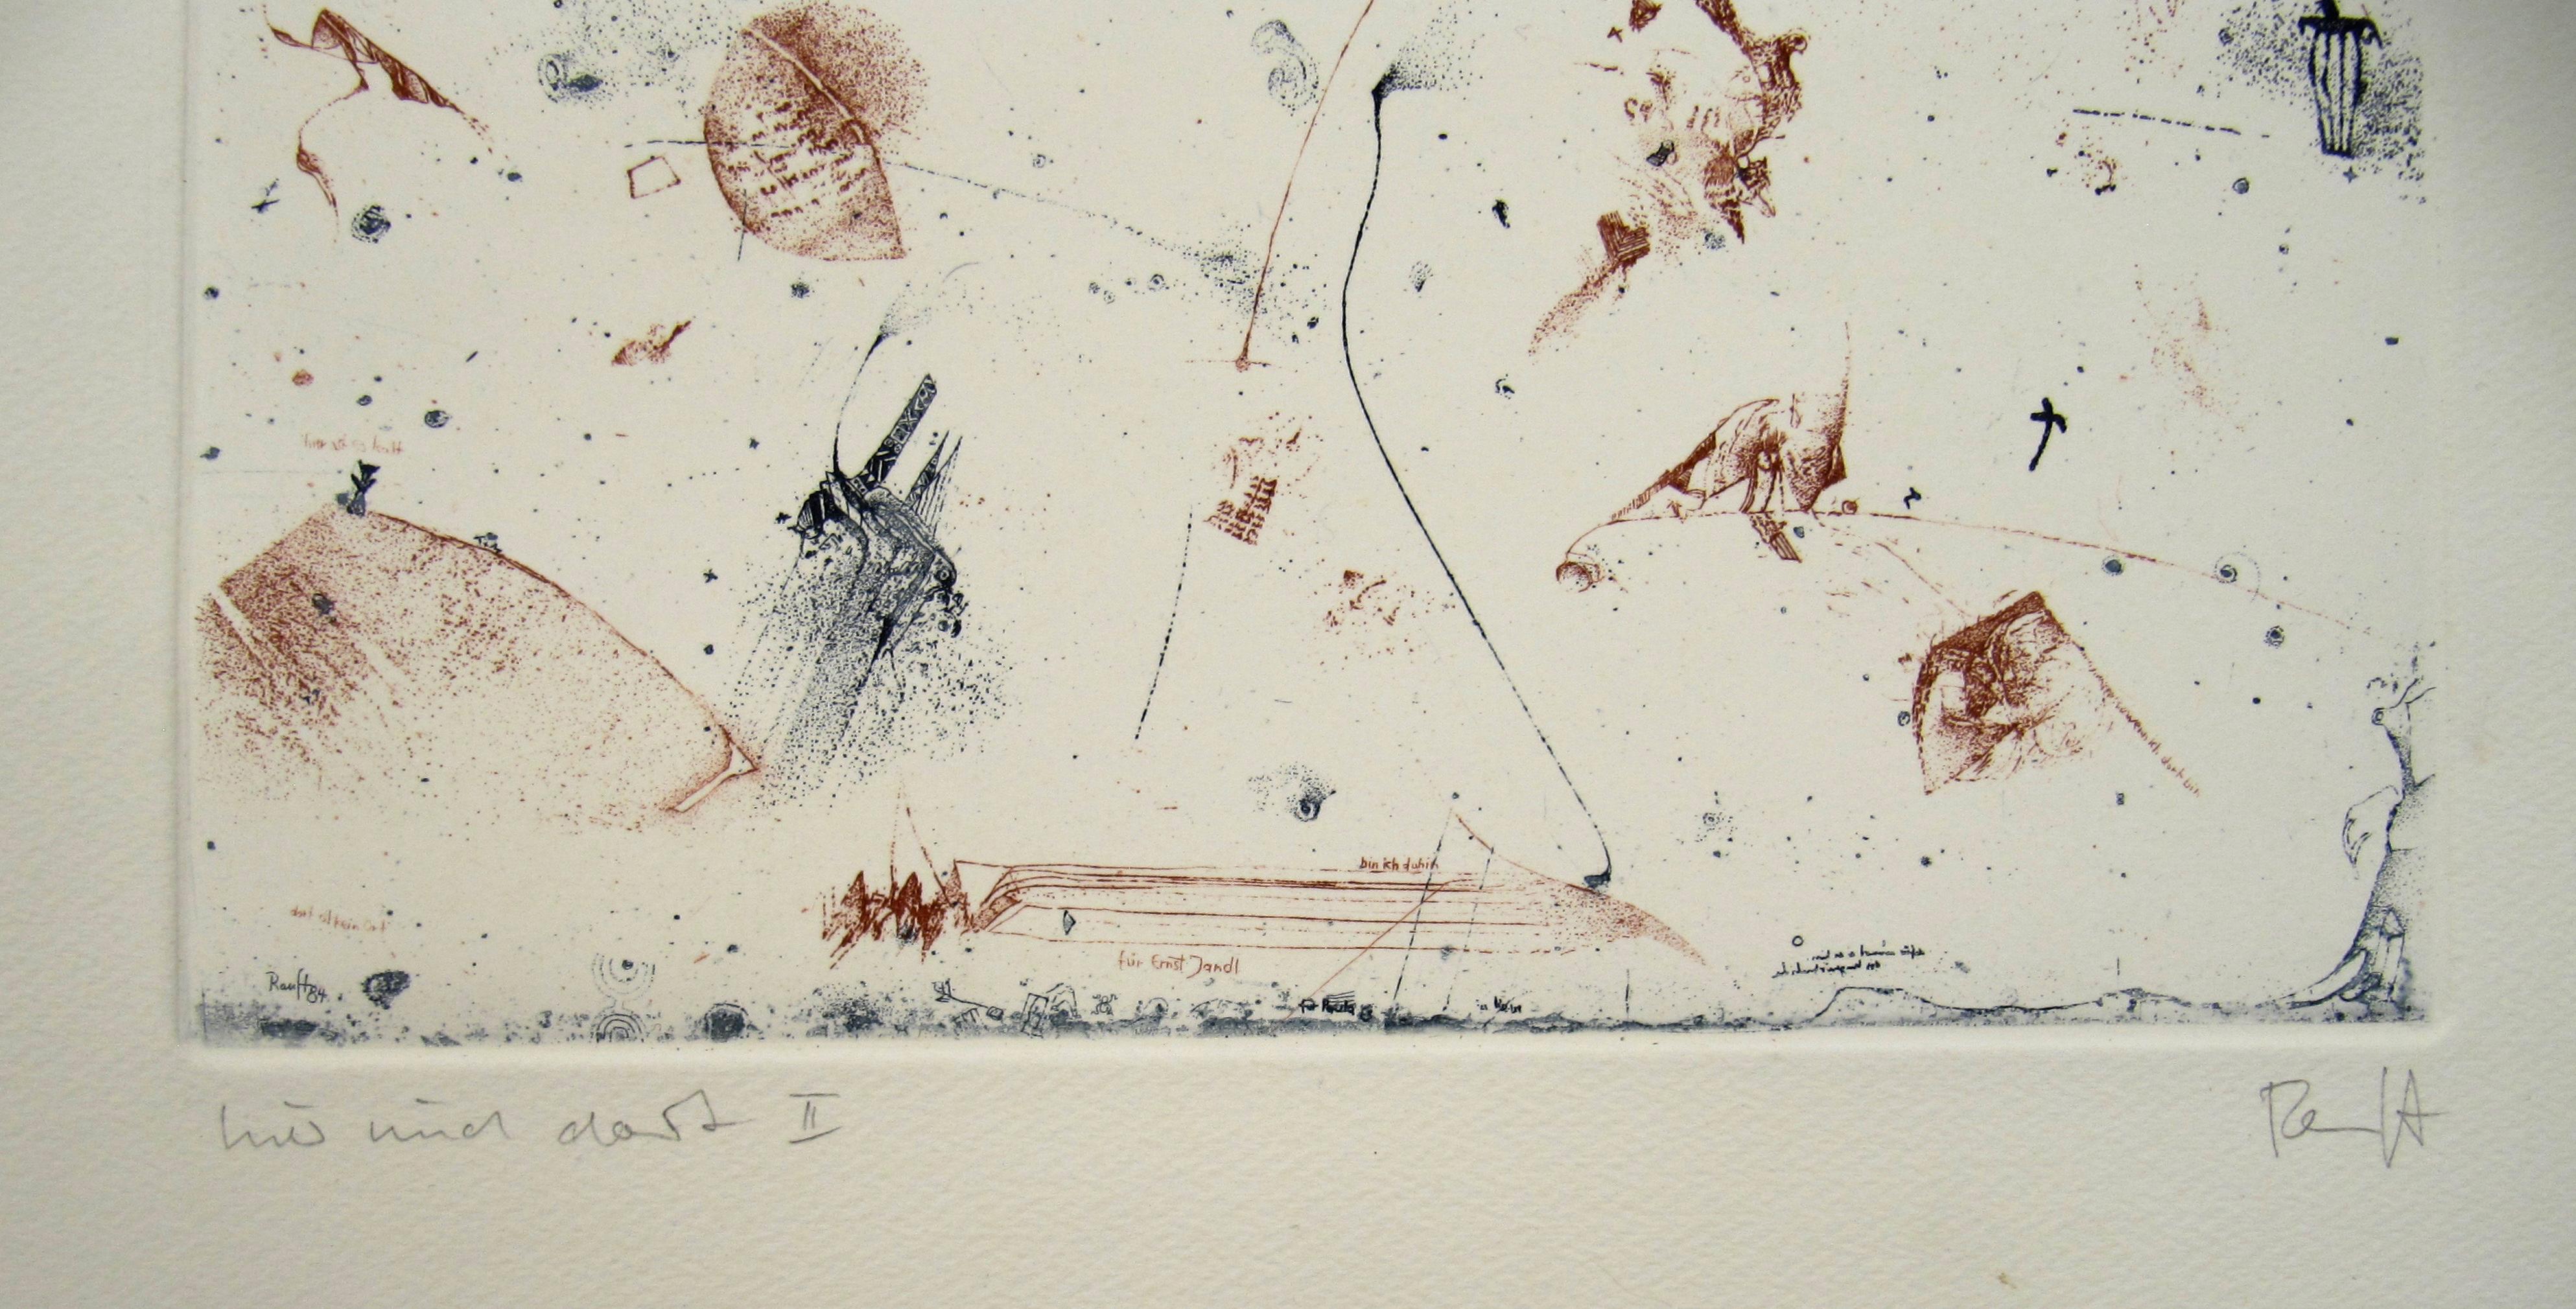 Thomas Ranft (1945) - Hier und dort II, 1984 - Abstract Etching - Edition 3 / 15 For Sale 2